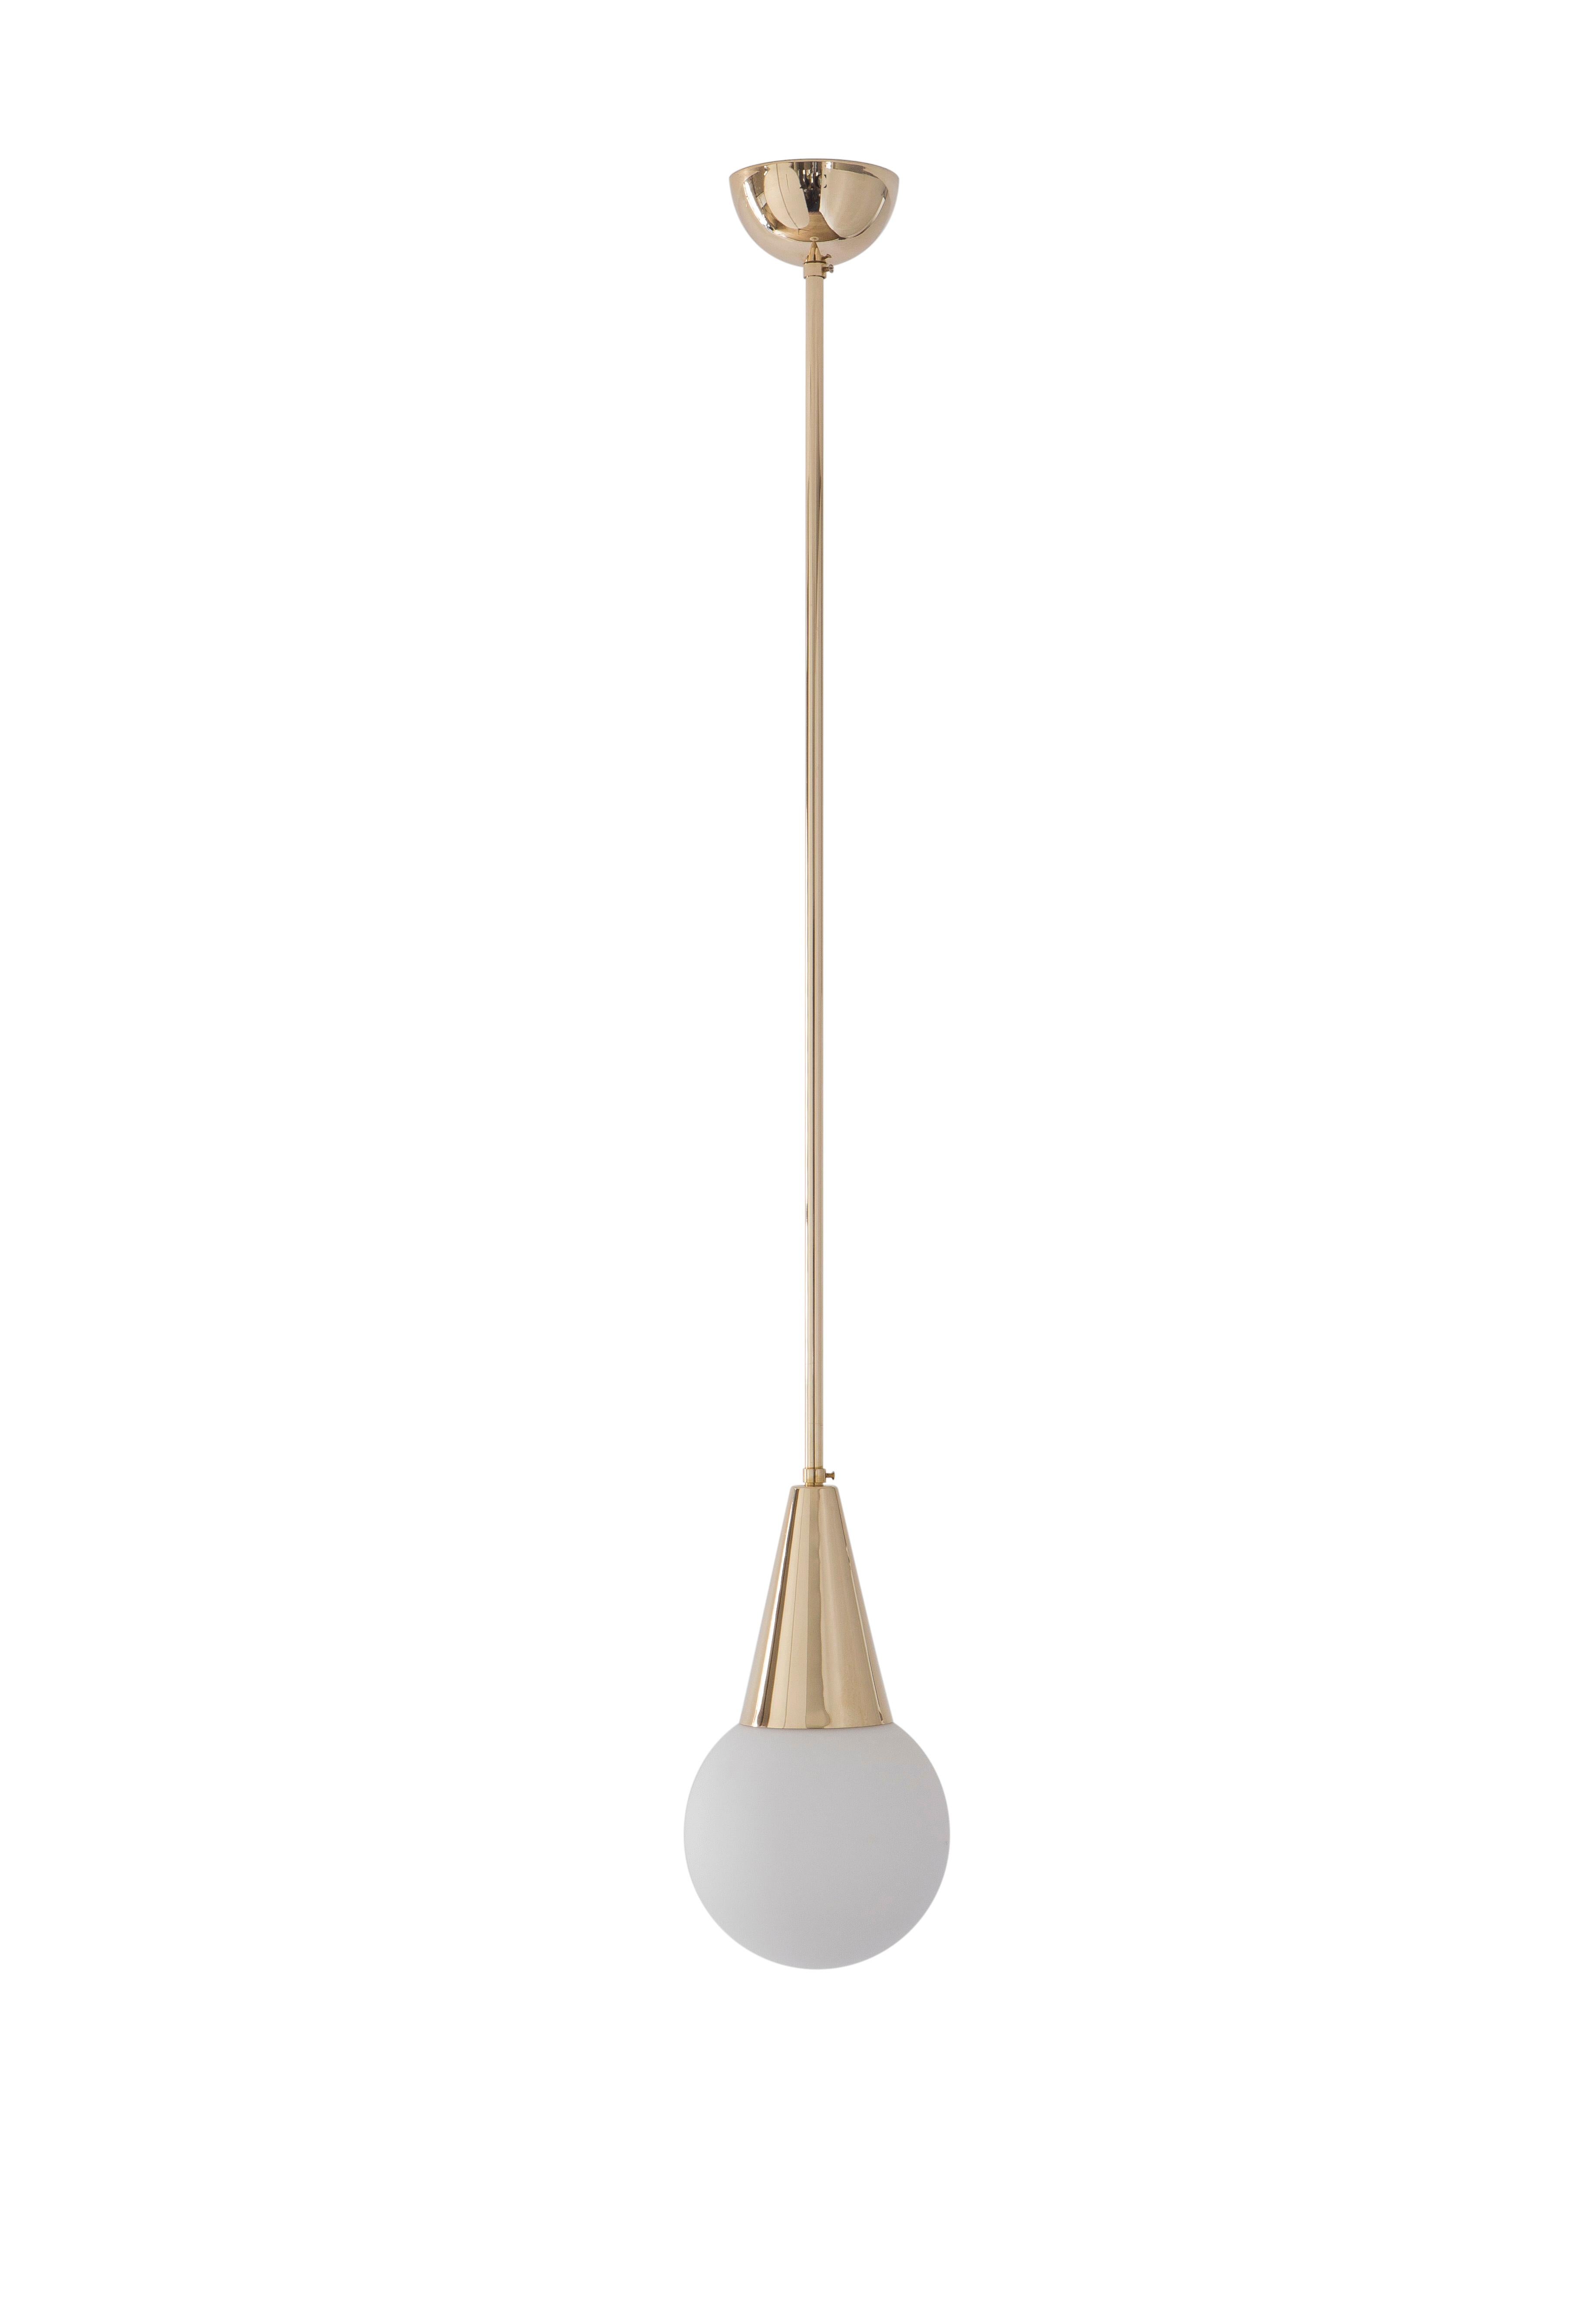 Pendant 05 by Magic Circus Editions
Dimensions: D 25 x W 25 x H 90 cm, also available in H 110, 130, 150, 175, 190 cm
Materials: Brass, mouth blown glass

All our lamps can be wired according to each country. If sold to the USA it will be wired